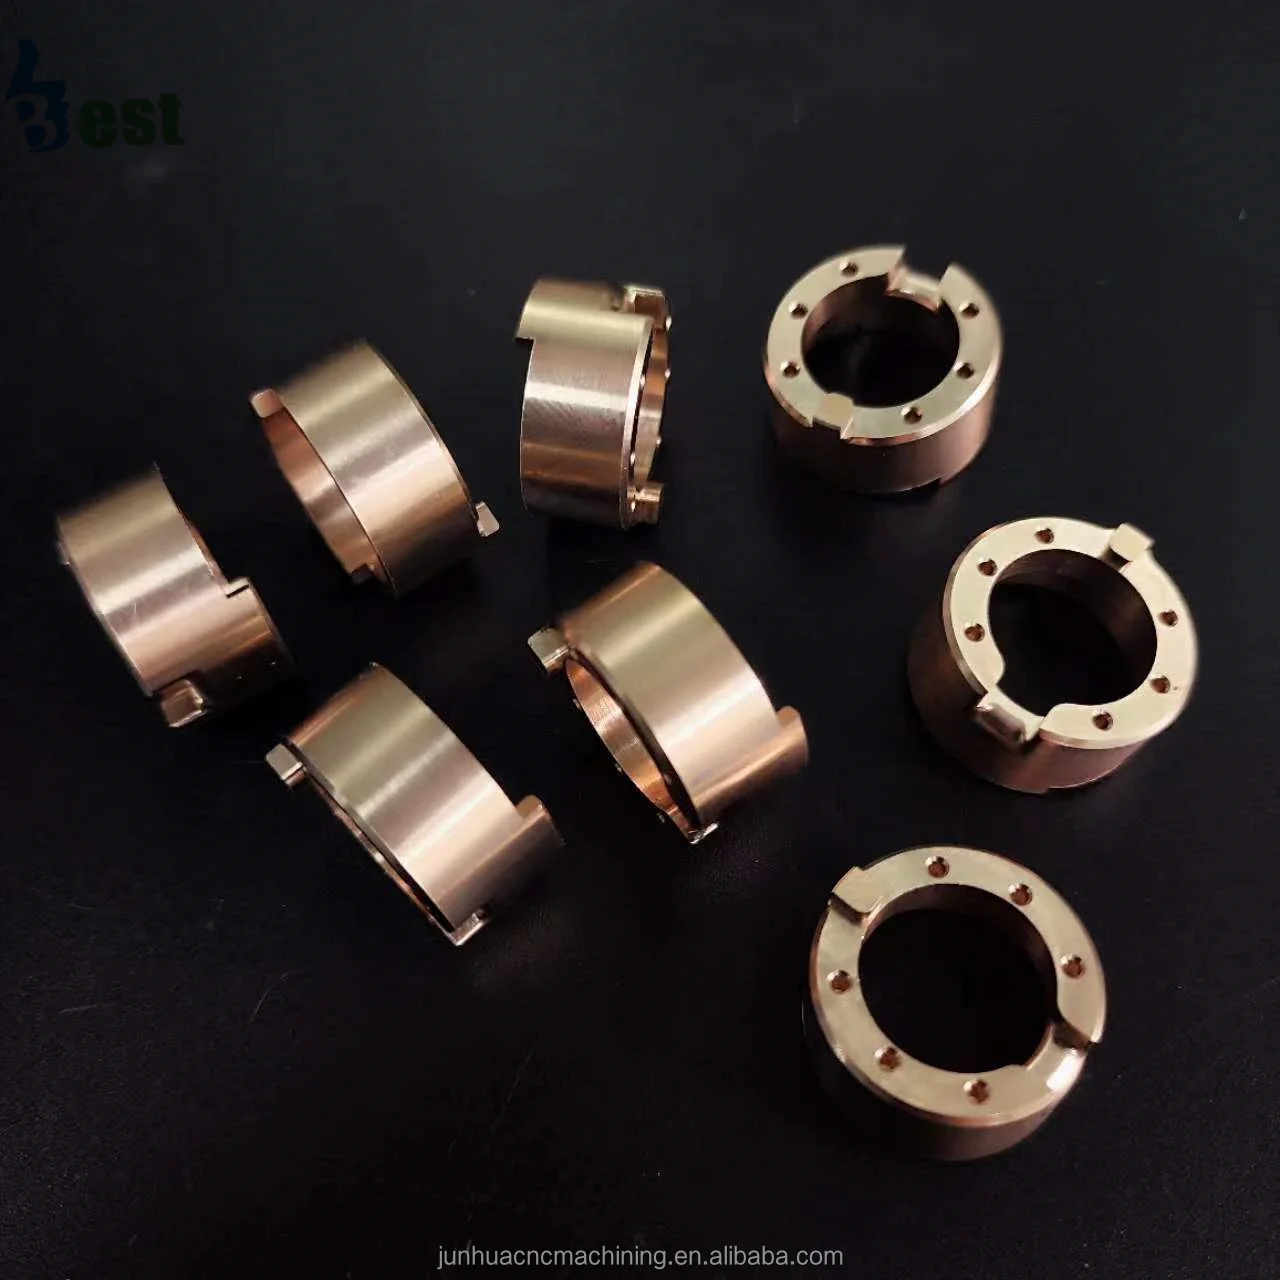 

OEM Custom Cnc Milling Turning Service Stainless Steel Brass Parts 5 Axis Cnc Machining Services